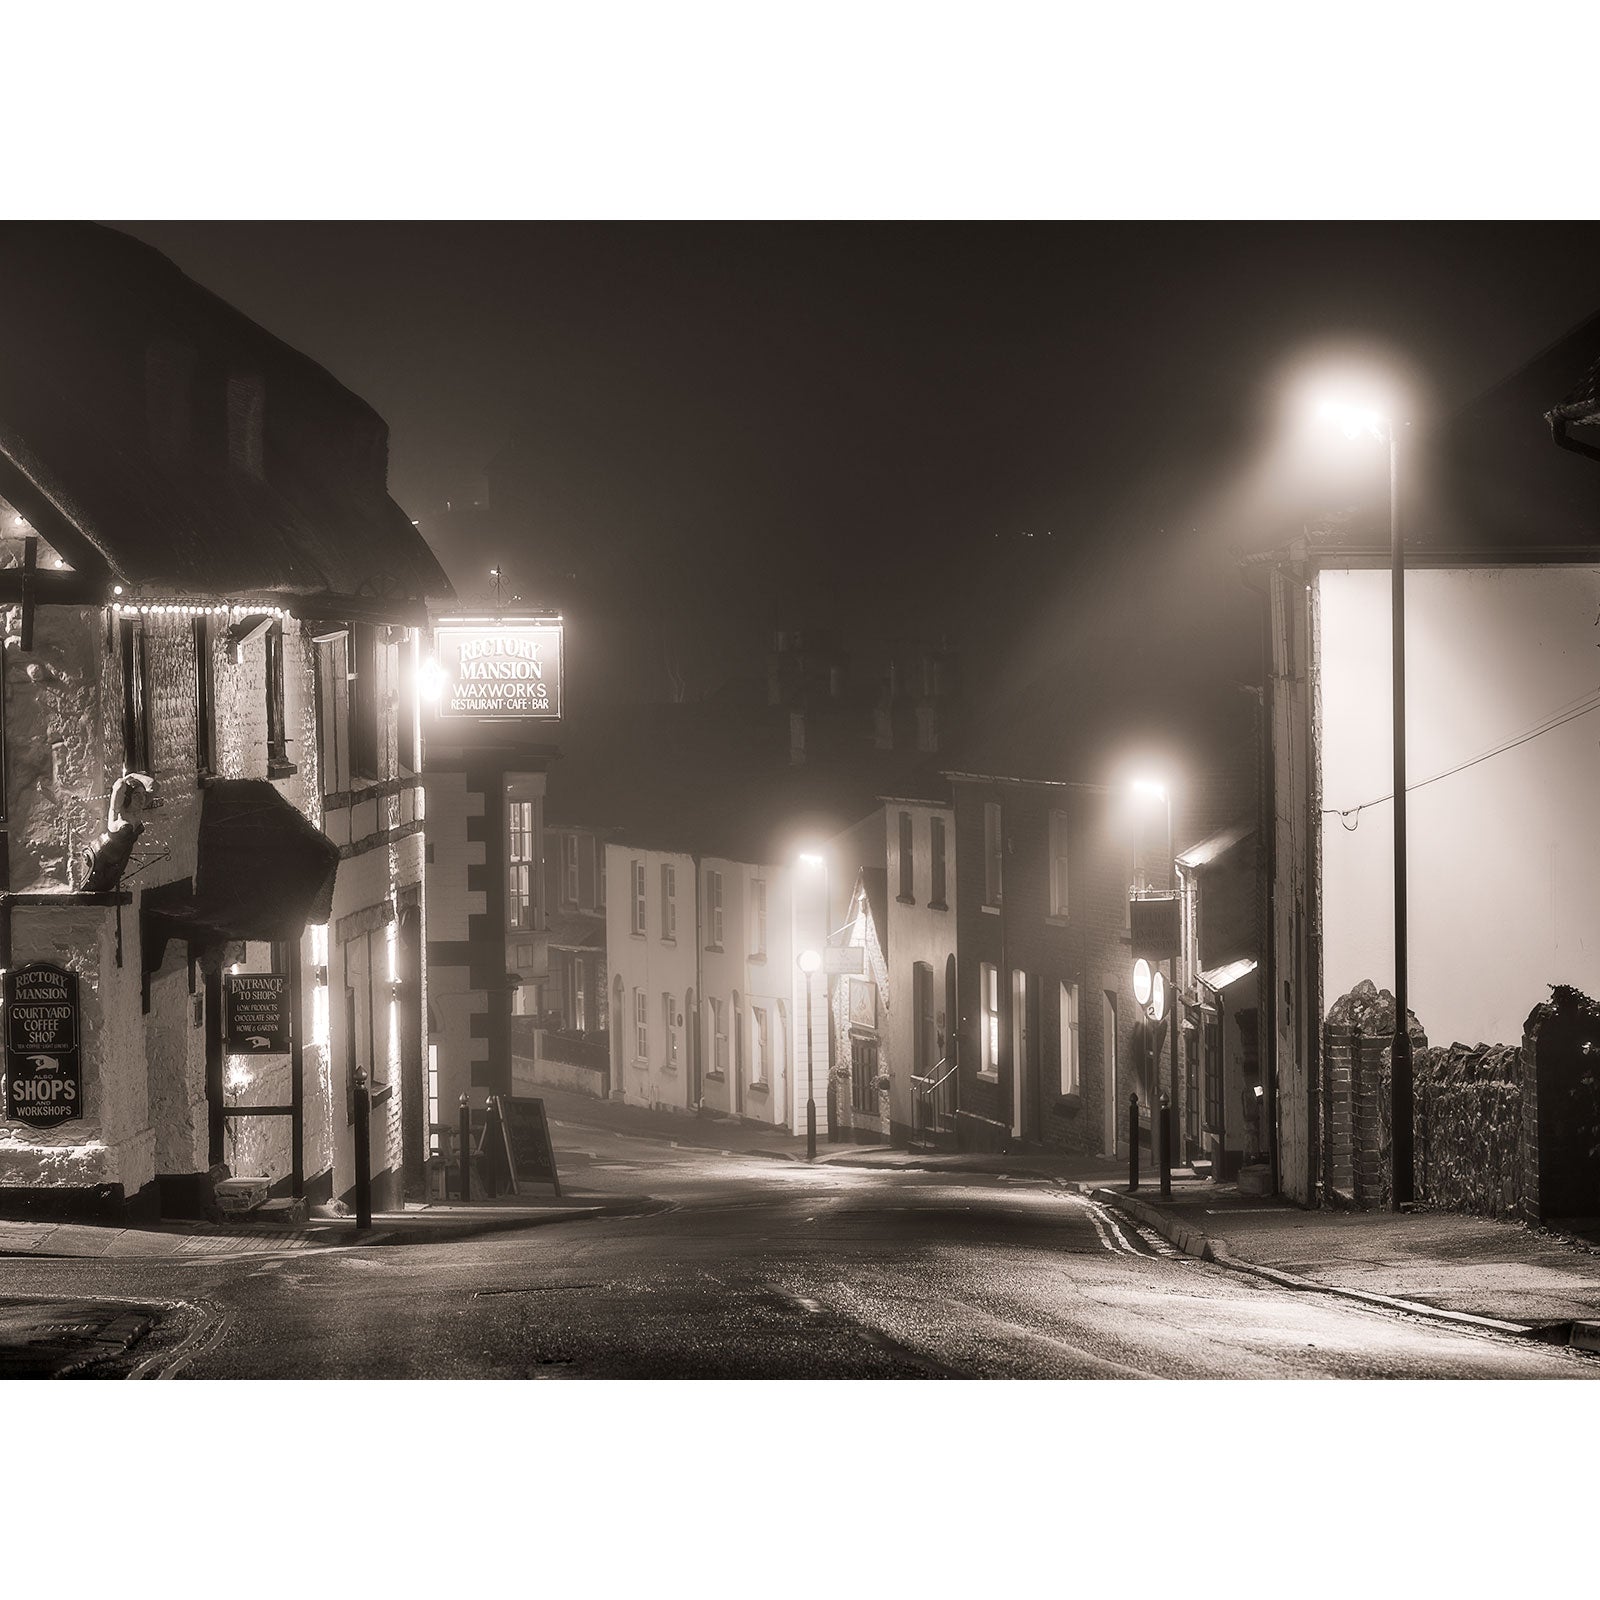 A Brading misty street at night illuminated by streetlights with buildings on one side.